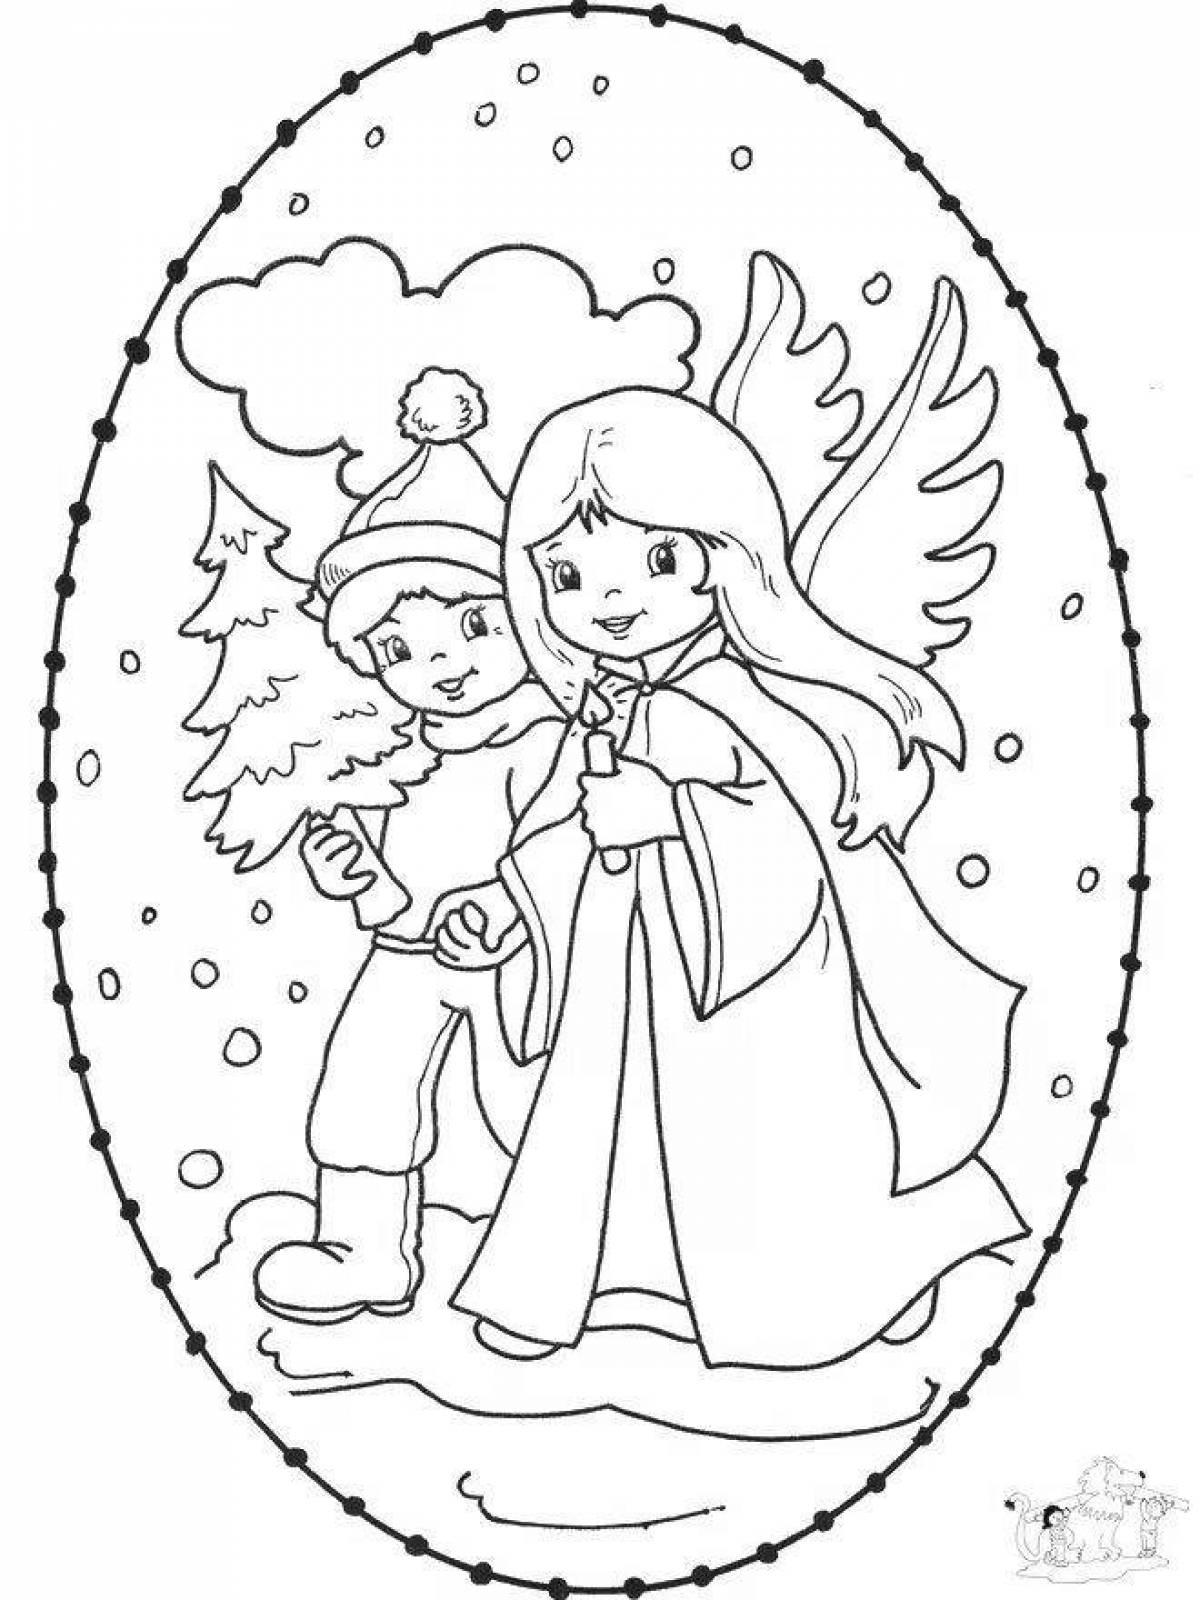 Humorous coloring book with Christmas card